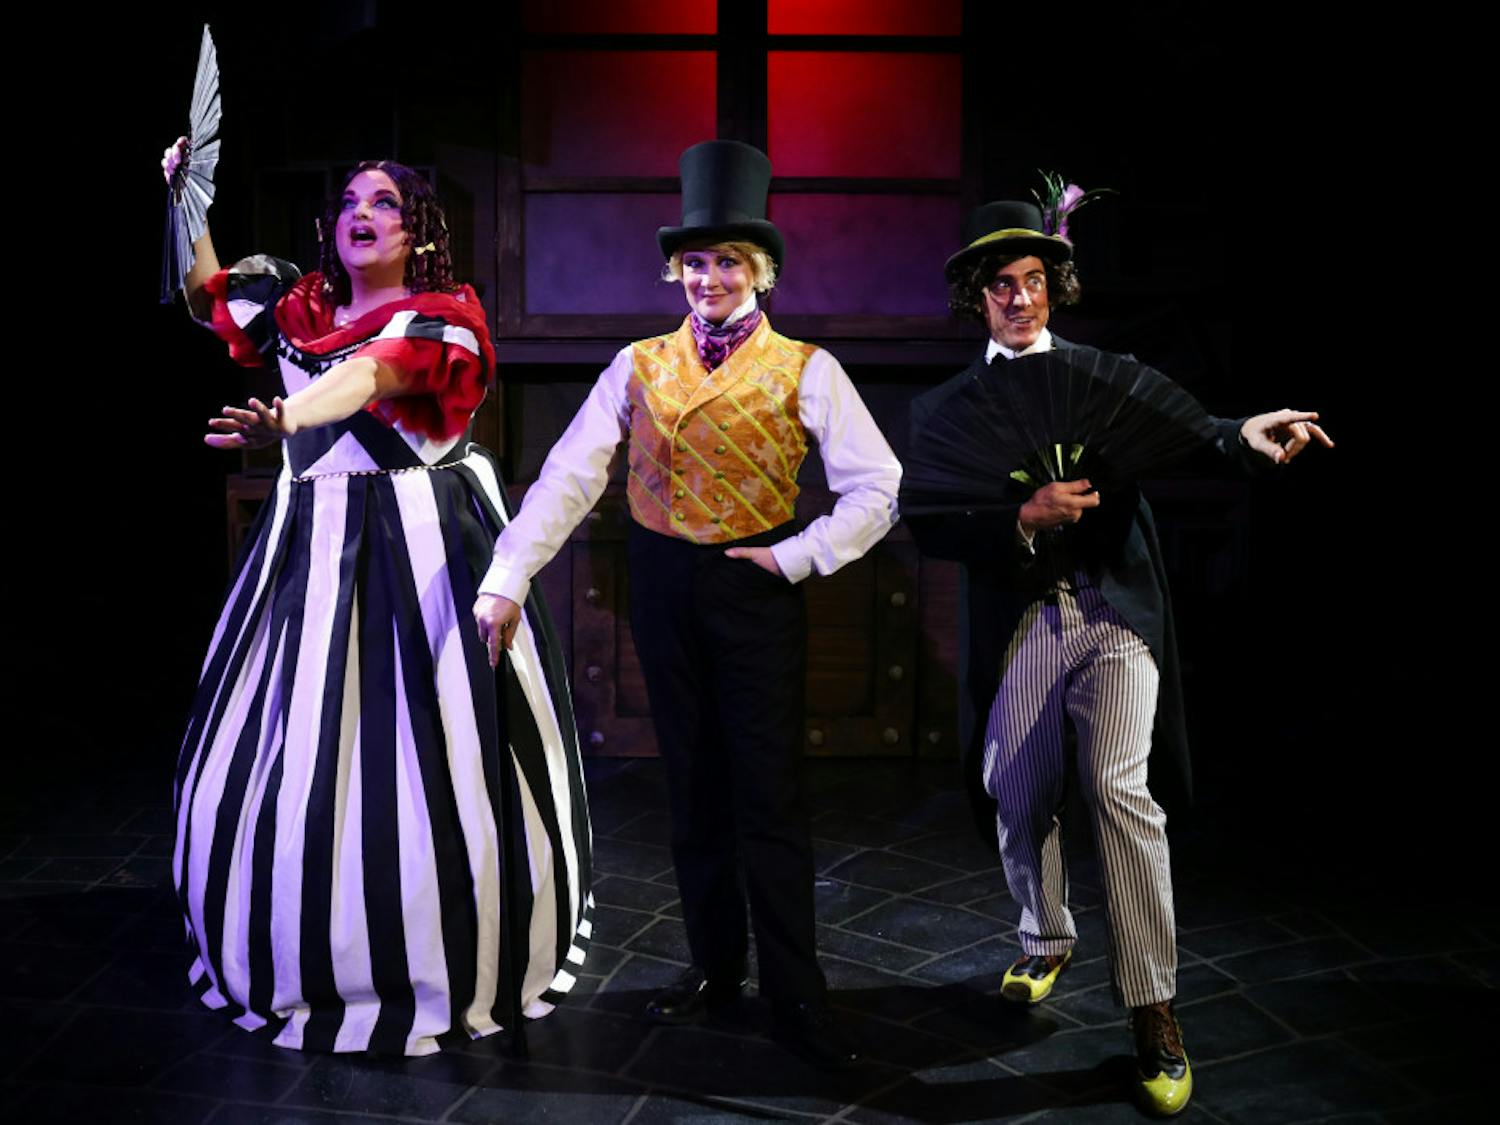 Actors Matthew McGee, Kelly Atkins and David Patrick Ford take center stage in costume for their roles in the Hippodrome's "Scrooge in Rouge."